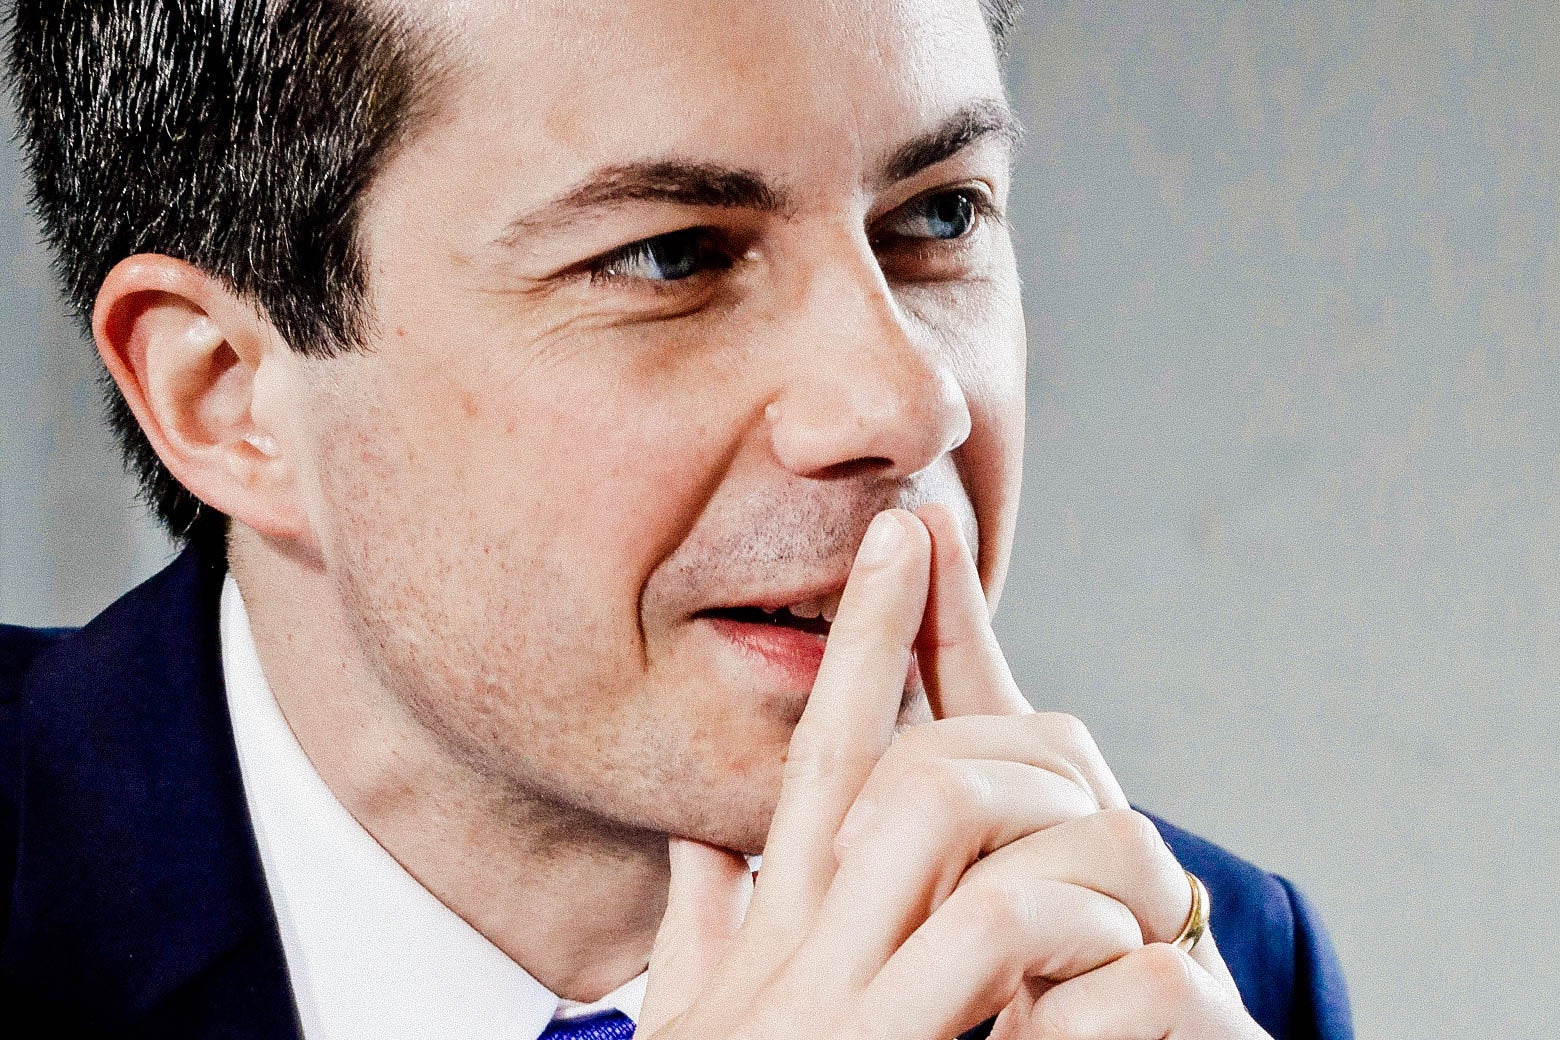 Pete Buttigieg holds tented fingers up to his face.